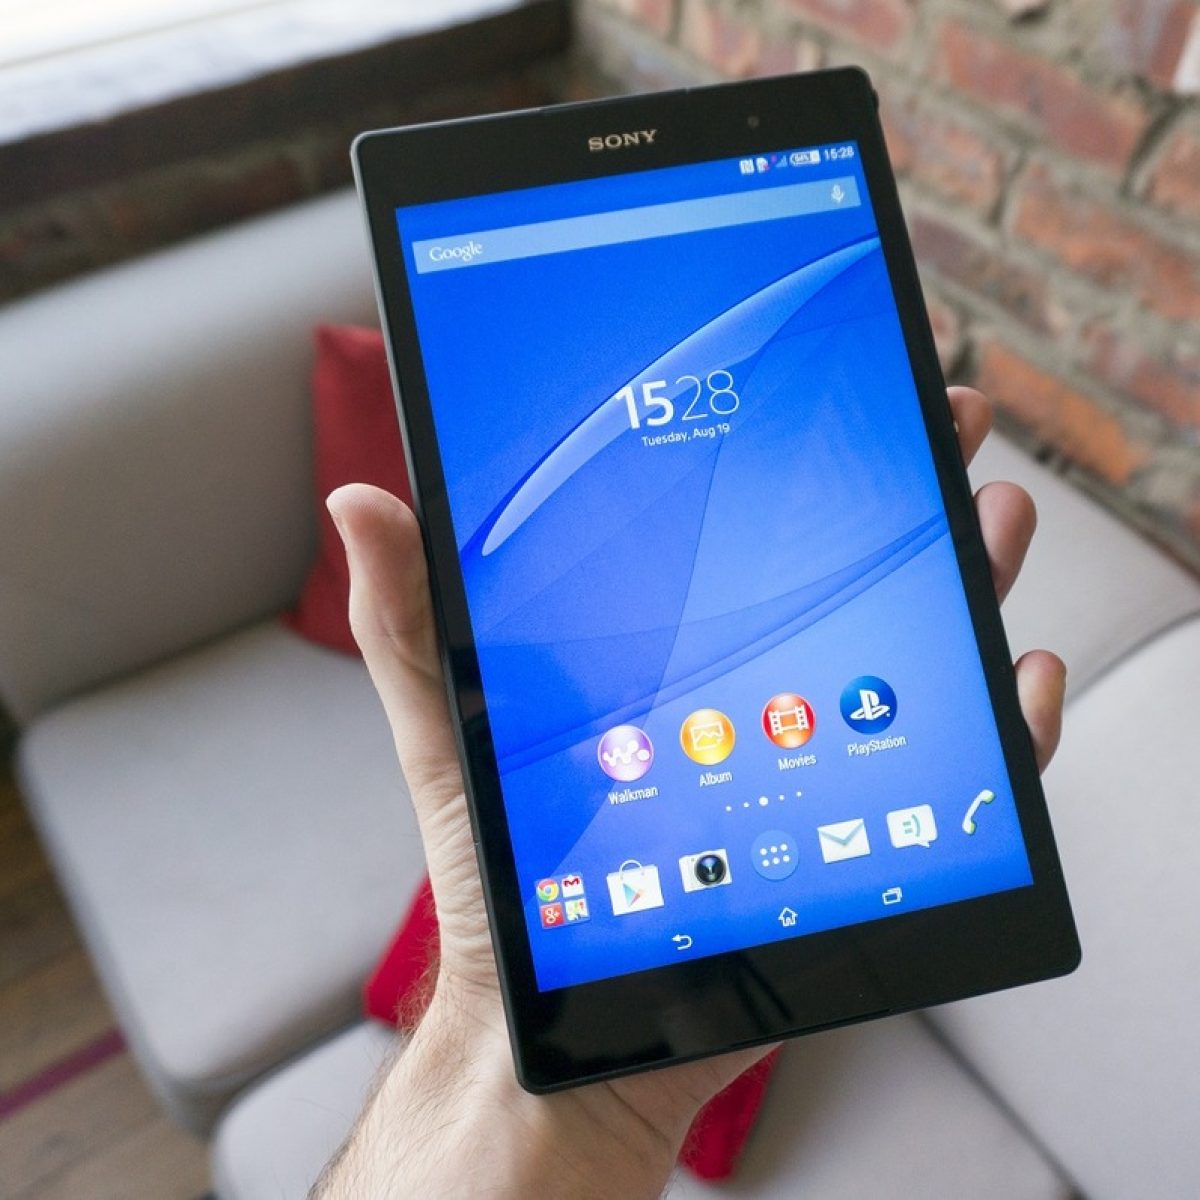 Xperia Z3 Tablet Camera Not Working: Troubleshooting Tips